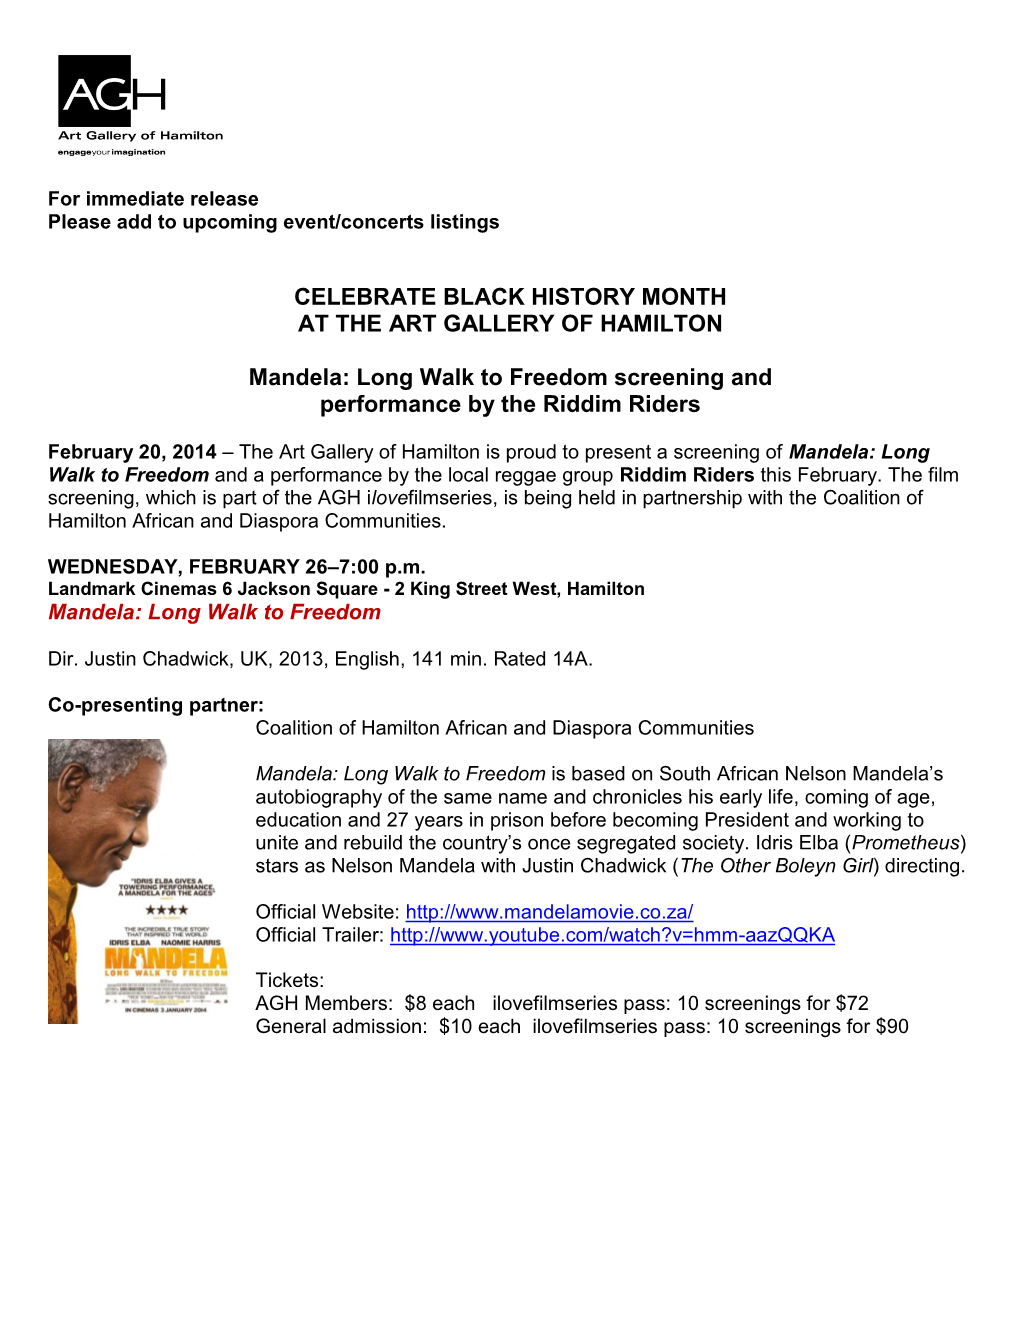 Celebrate Black History Month at the Art Gallery of Hamilton